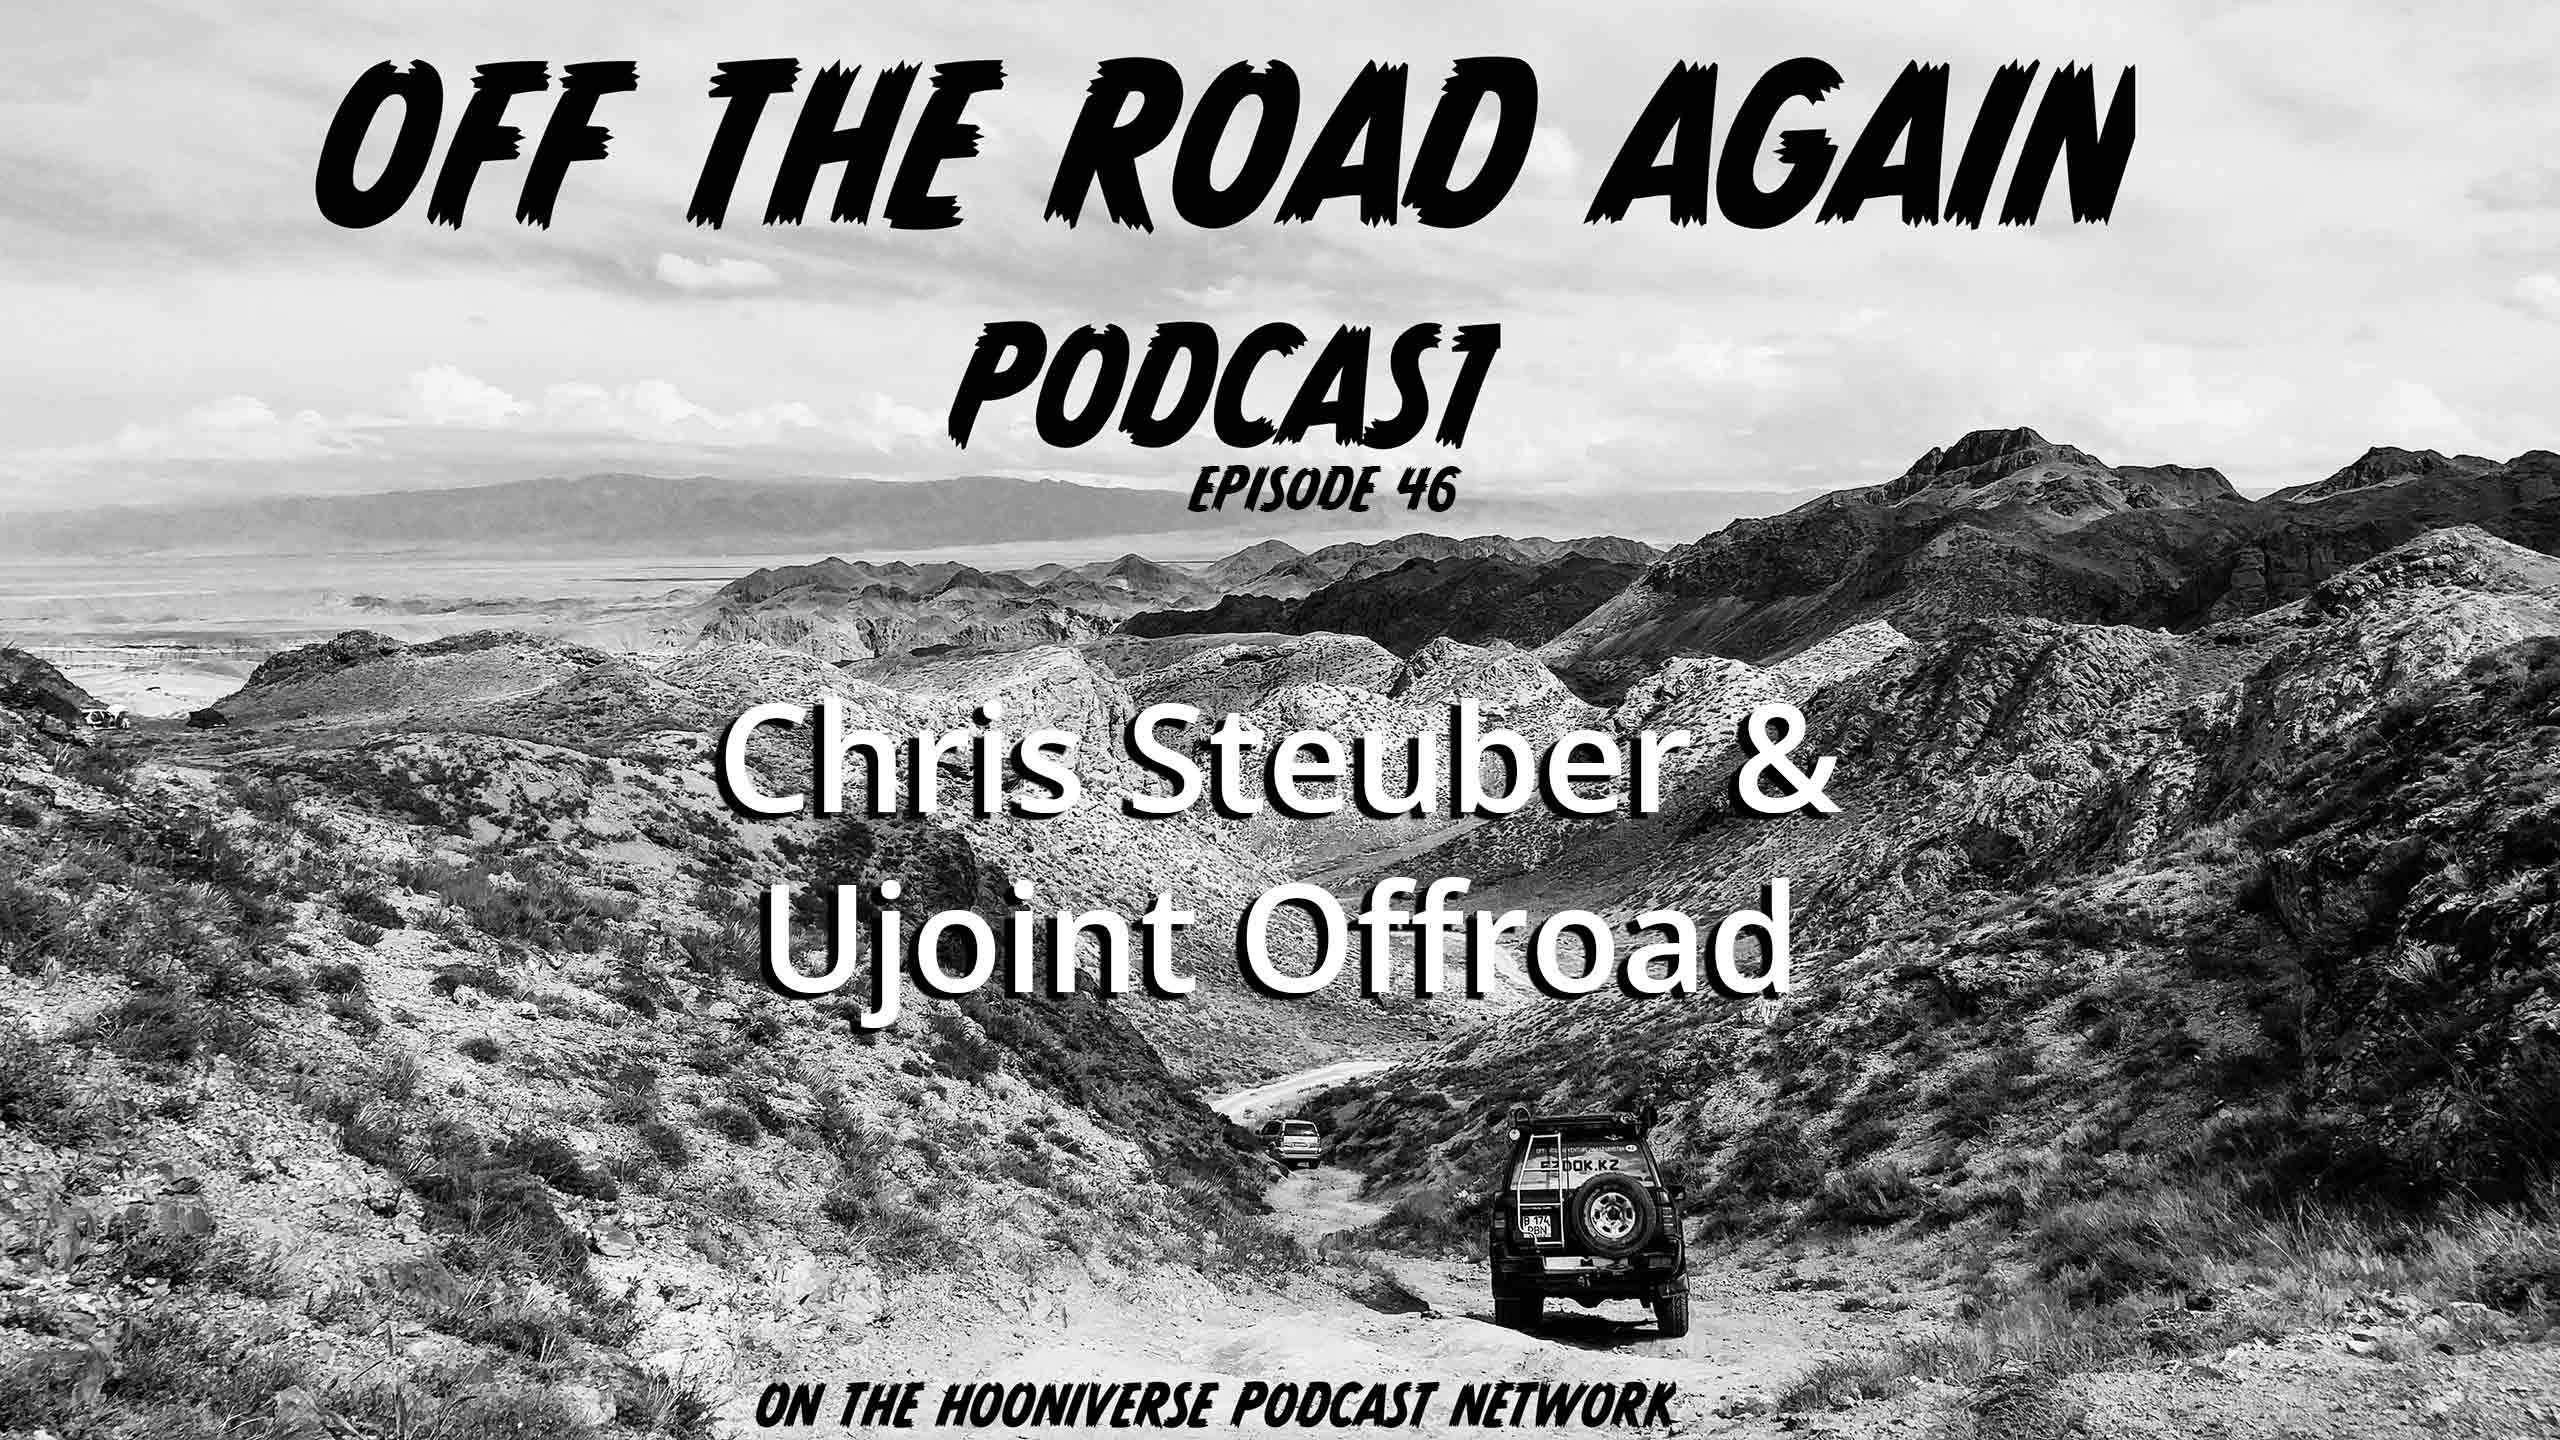 Chris-Steuber-UJoint-Offroad-Off-The-Road-Again-Podcast-Episode-46